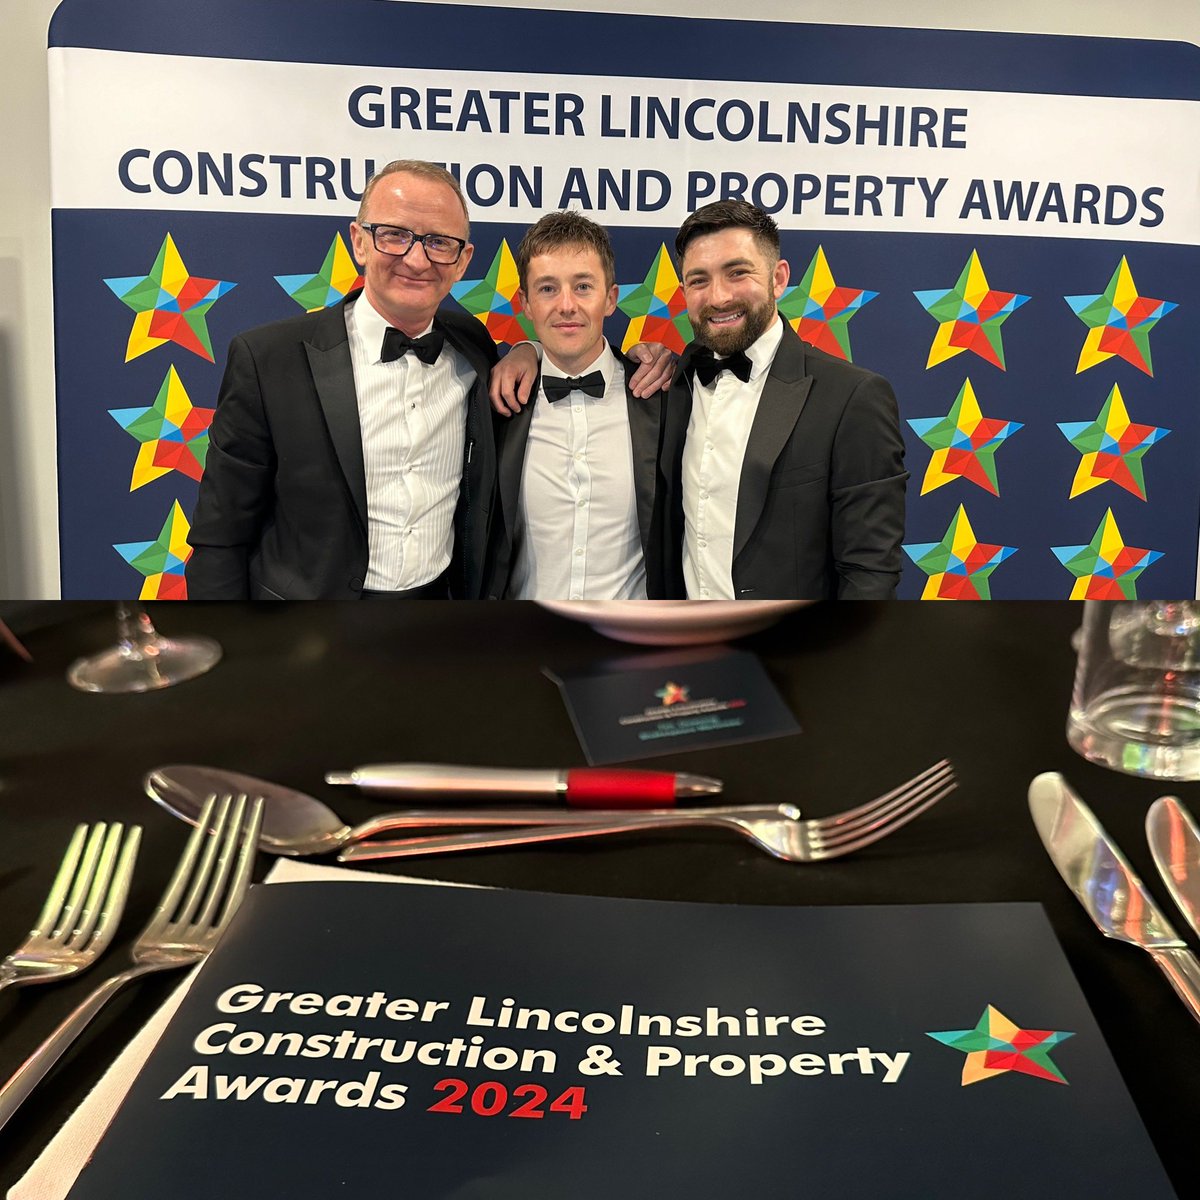 Great evening @doubletreelinc for the #lcpa awards celebrating #Lincolnshire #property and #Construction thank you @SHMALaw for the invite great to @PygottandCrone @jasperCaudwell @jamiethorpe1